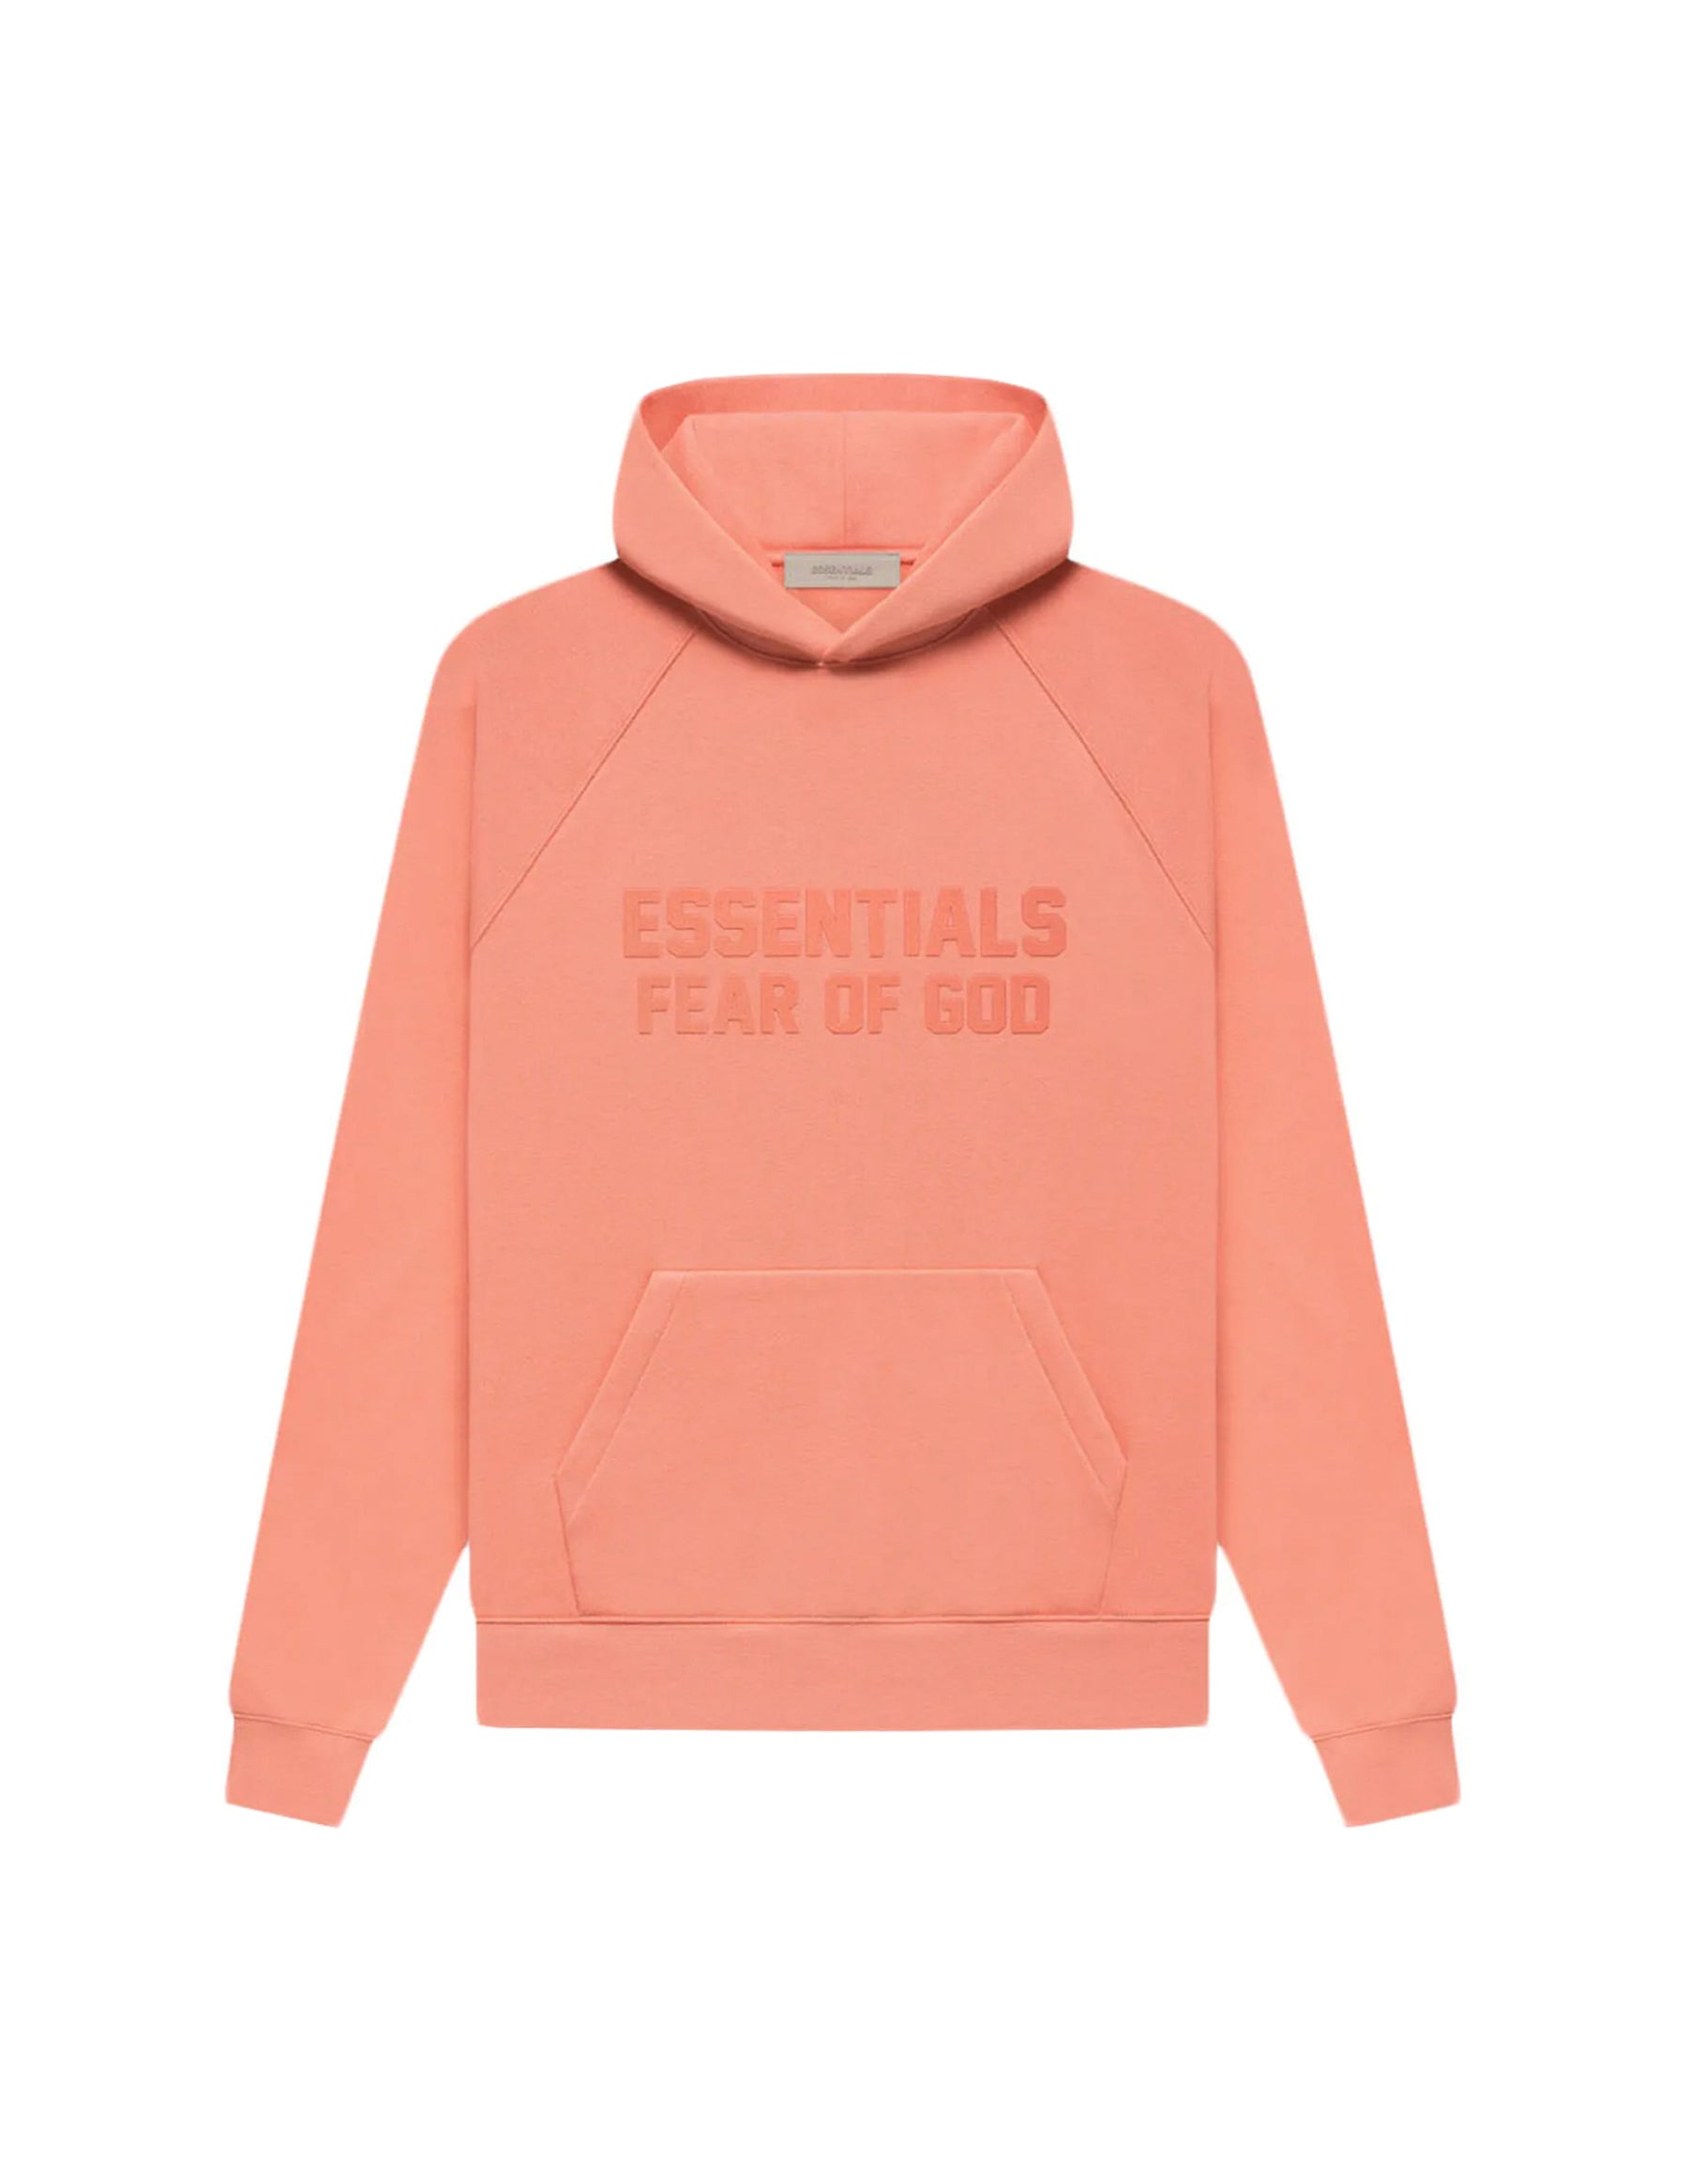 Fear Of God Essentials "Coral" Hoodie